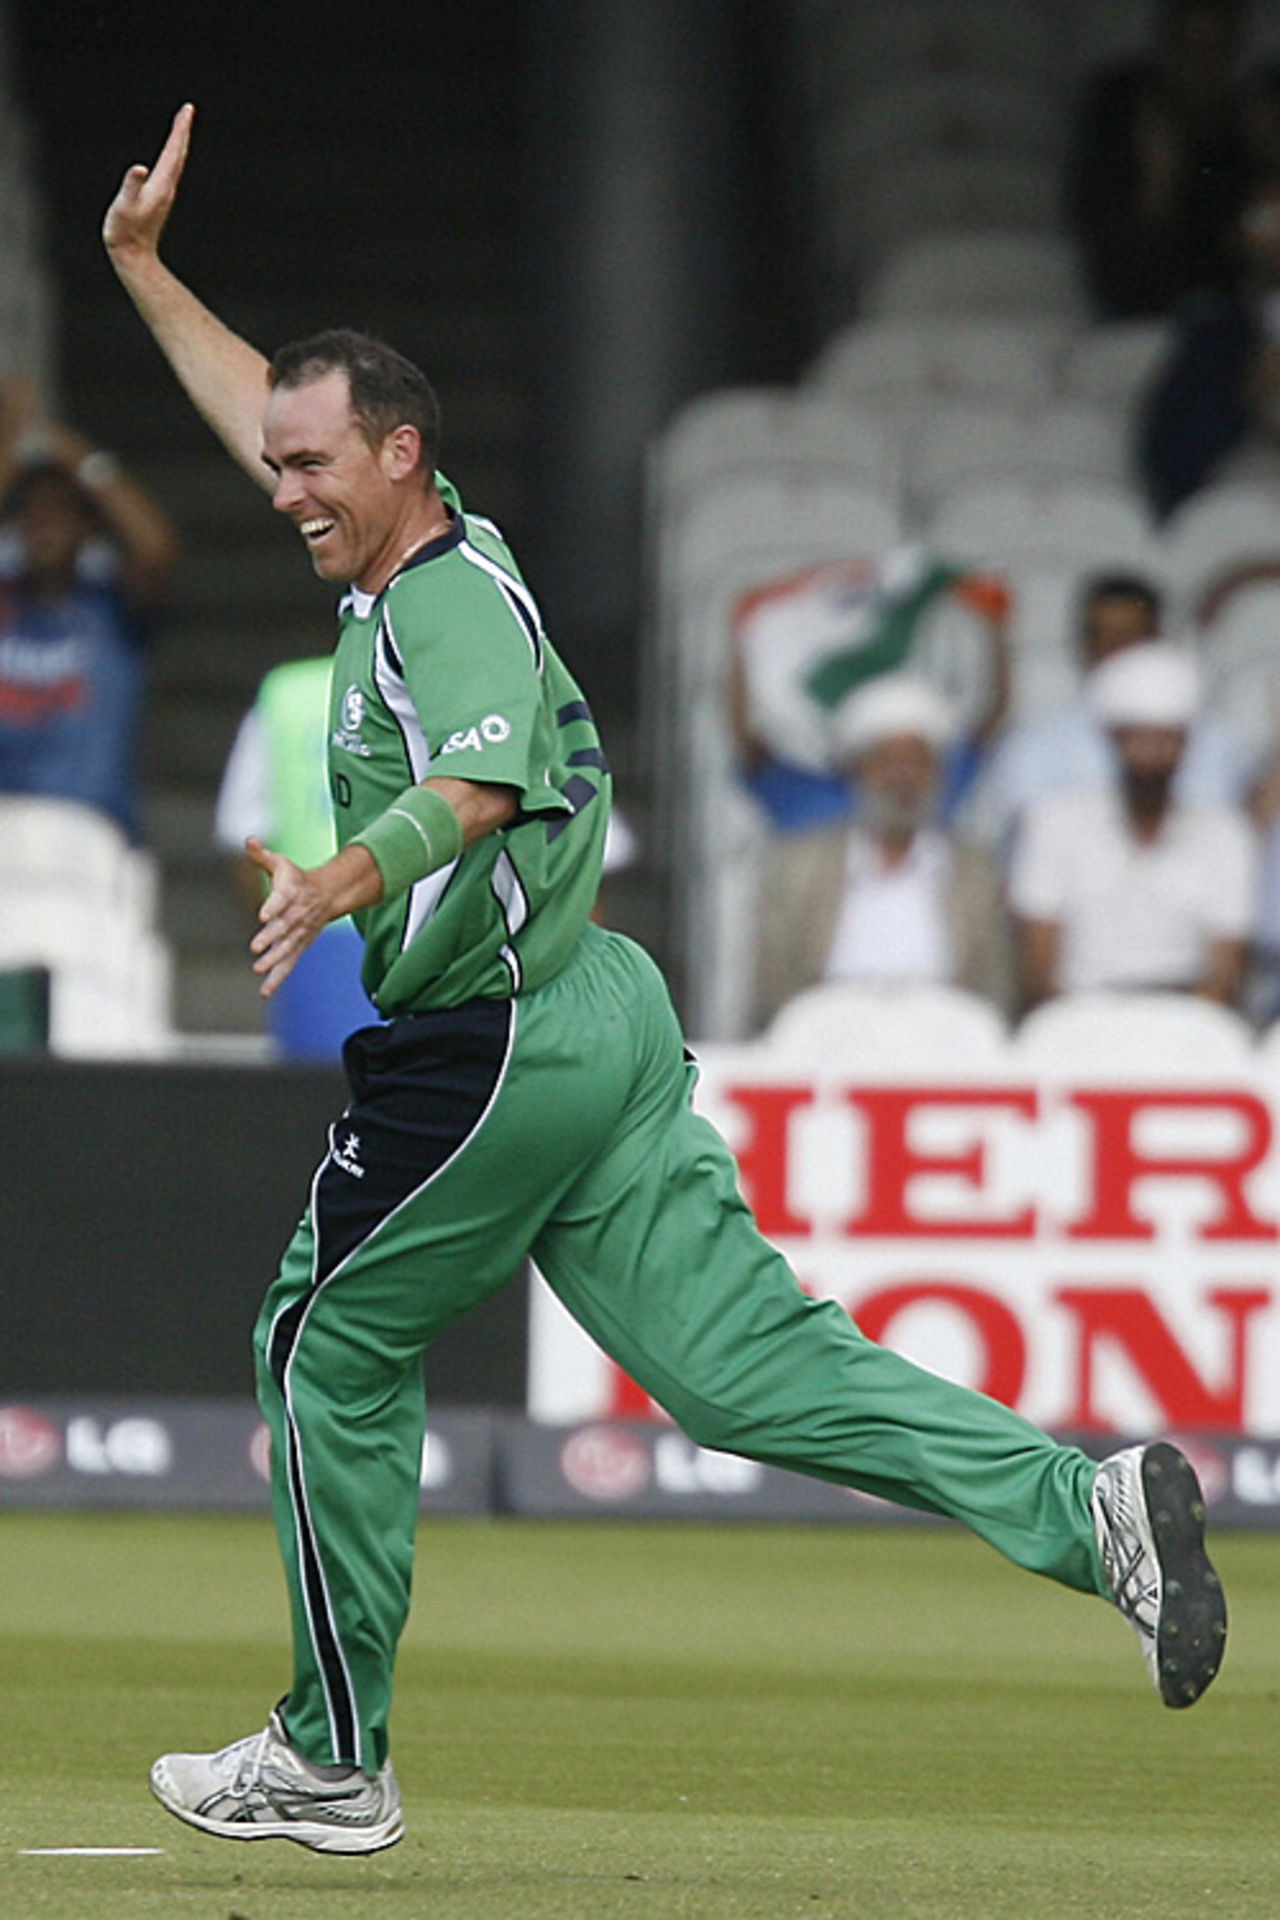 Trent Johnston celebrates the run-out of Ryan ten Doeschate in a thrilling Super Over finish to Ireland's match against Netherlands, Ireland v Netherlands, ICC World Twenty20 warm-up match, Lord's, June 1, 2009